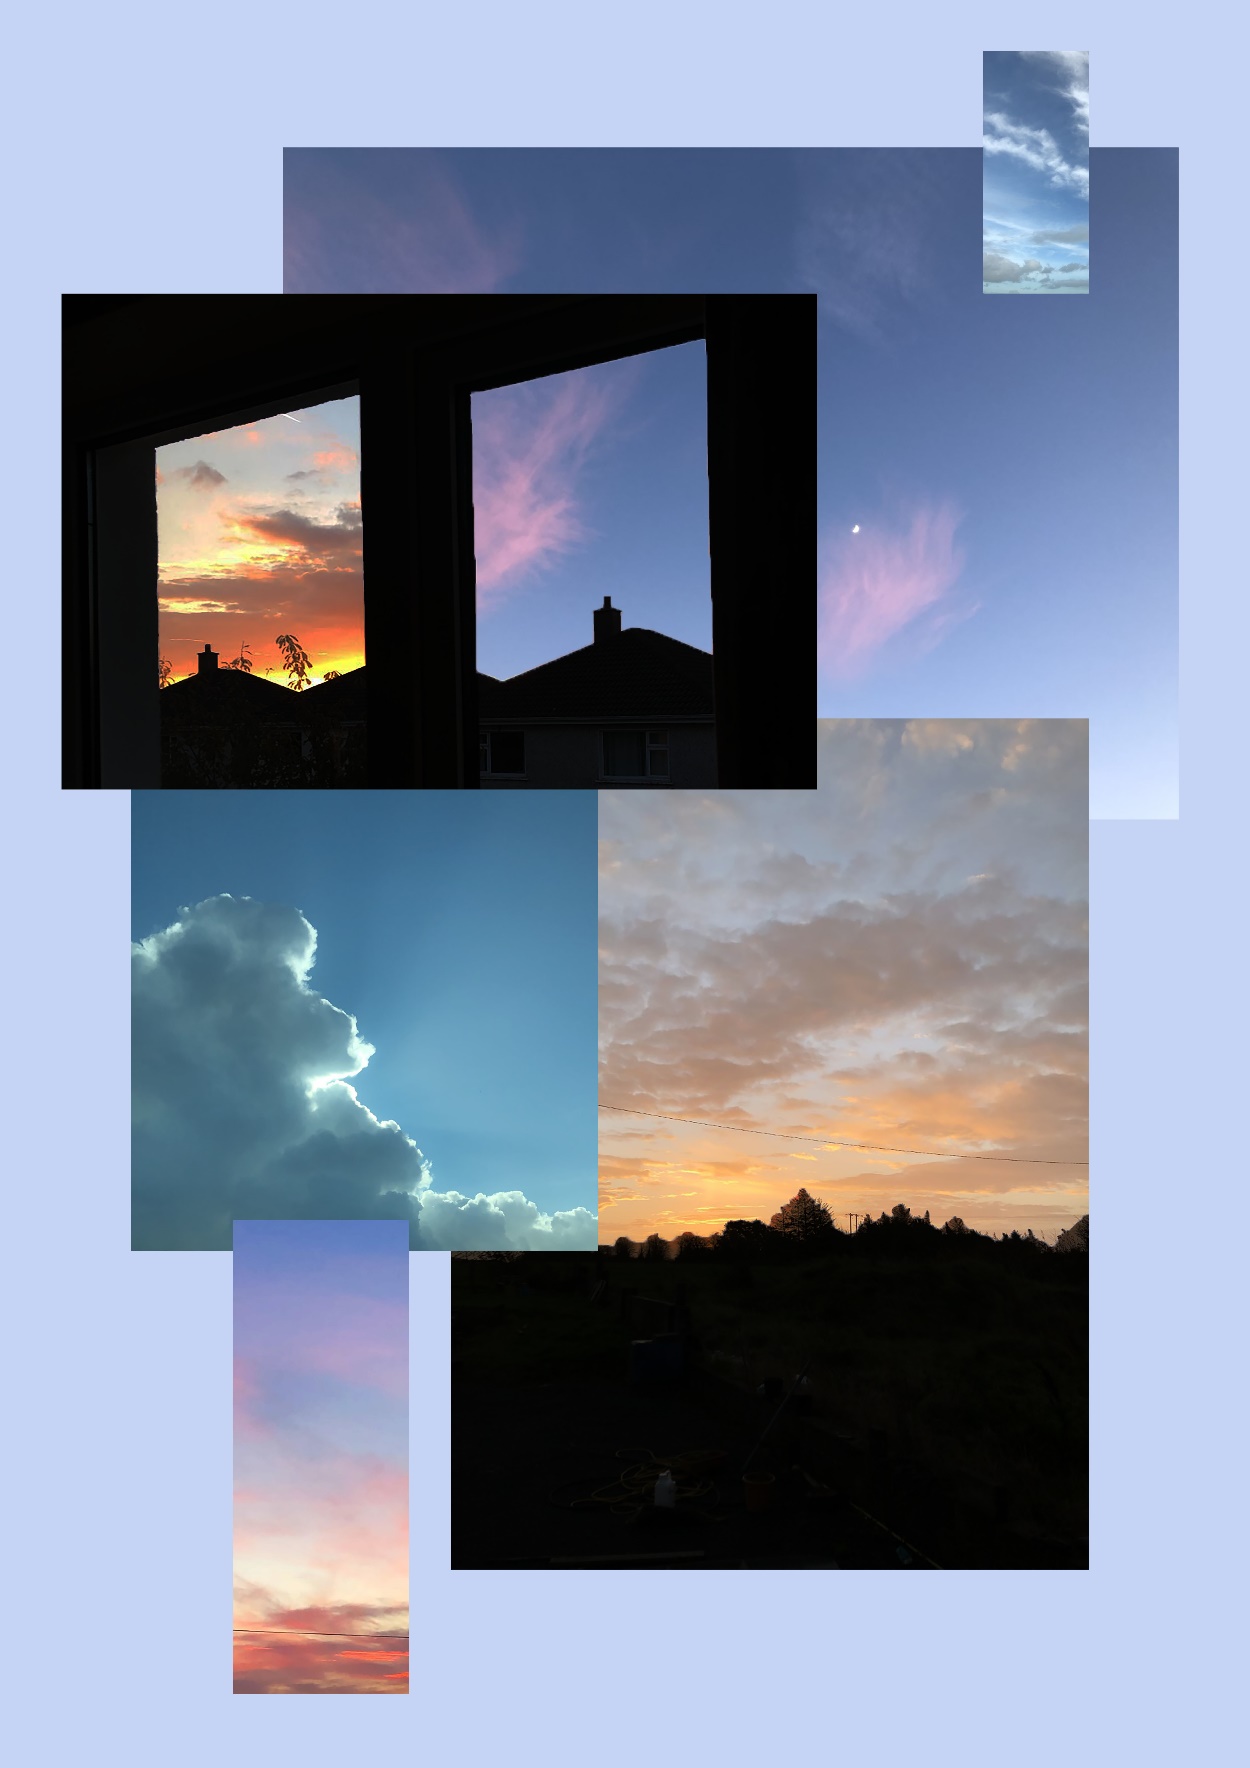 Inspiration Board by Niamh Carty. A collection of my inspiration photos, my own photography of the sky at various times.